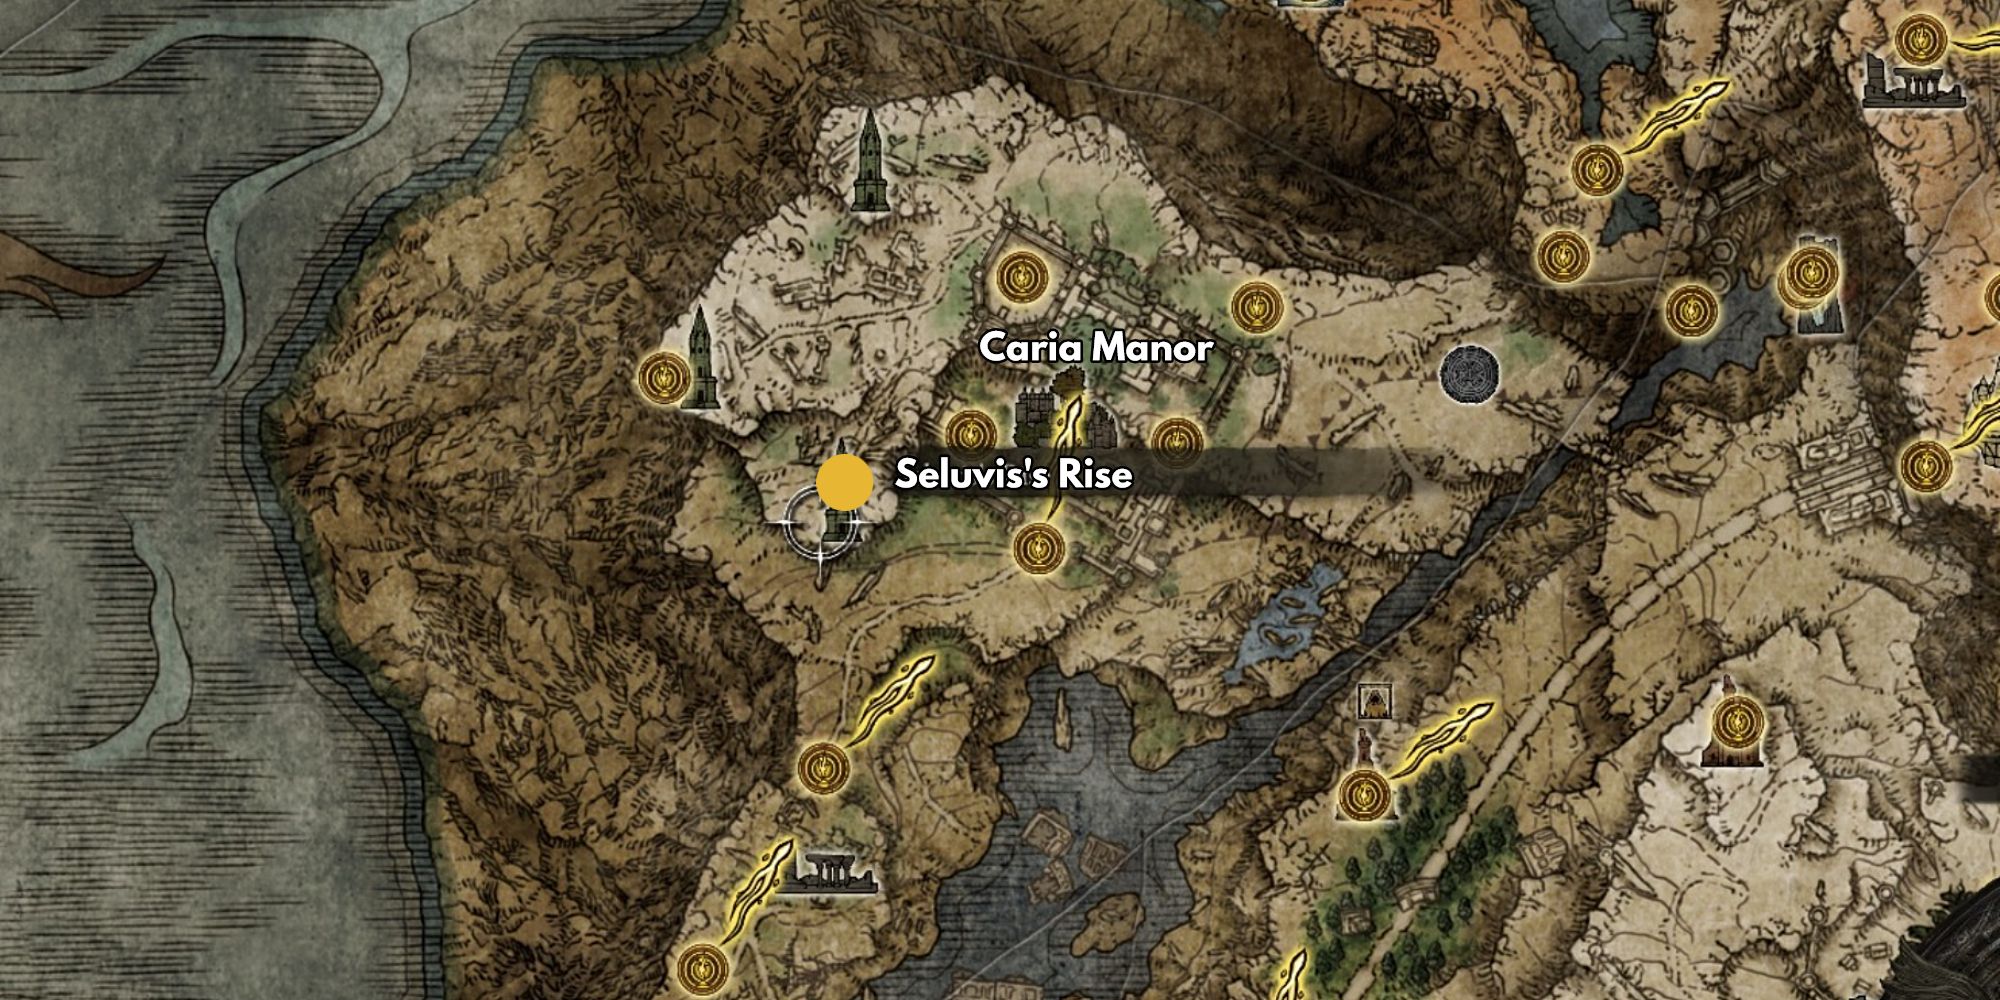 How To Get The Magic Scorpion Charm In Elden Ring